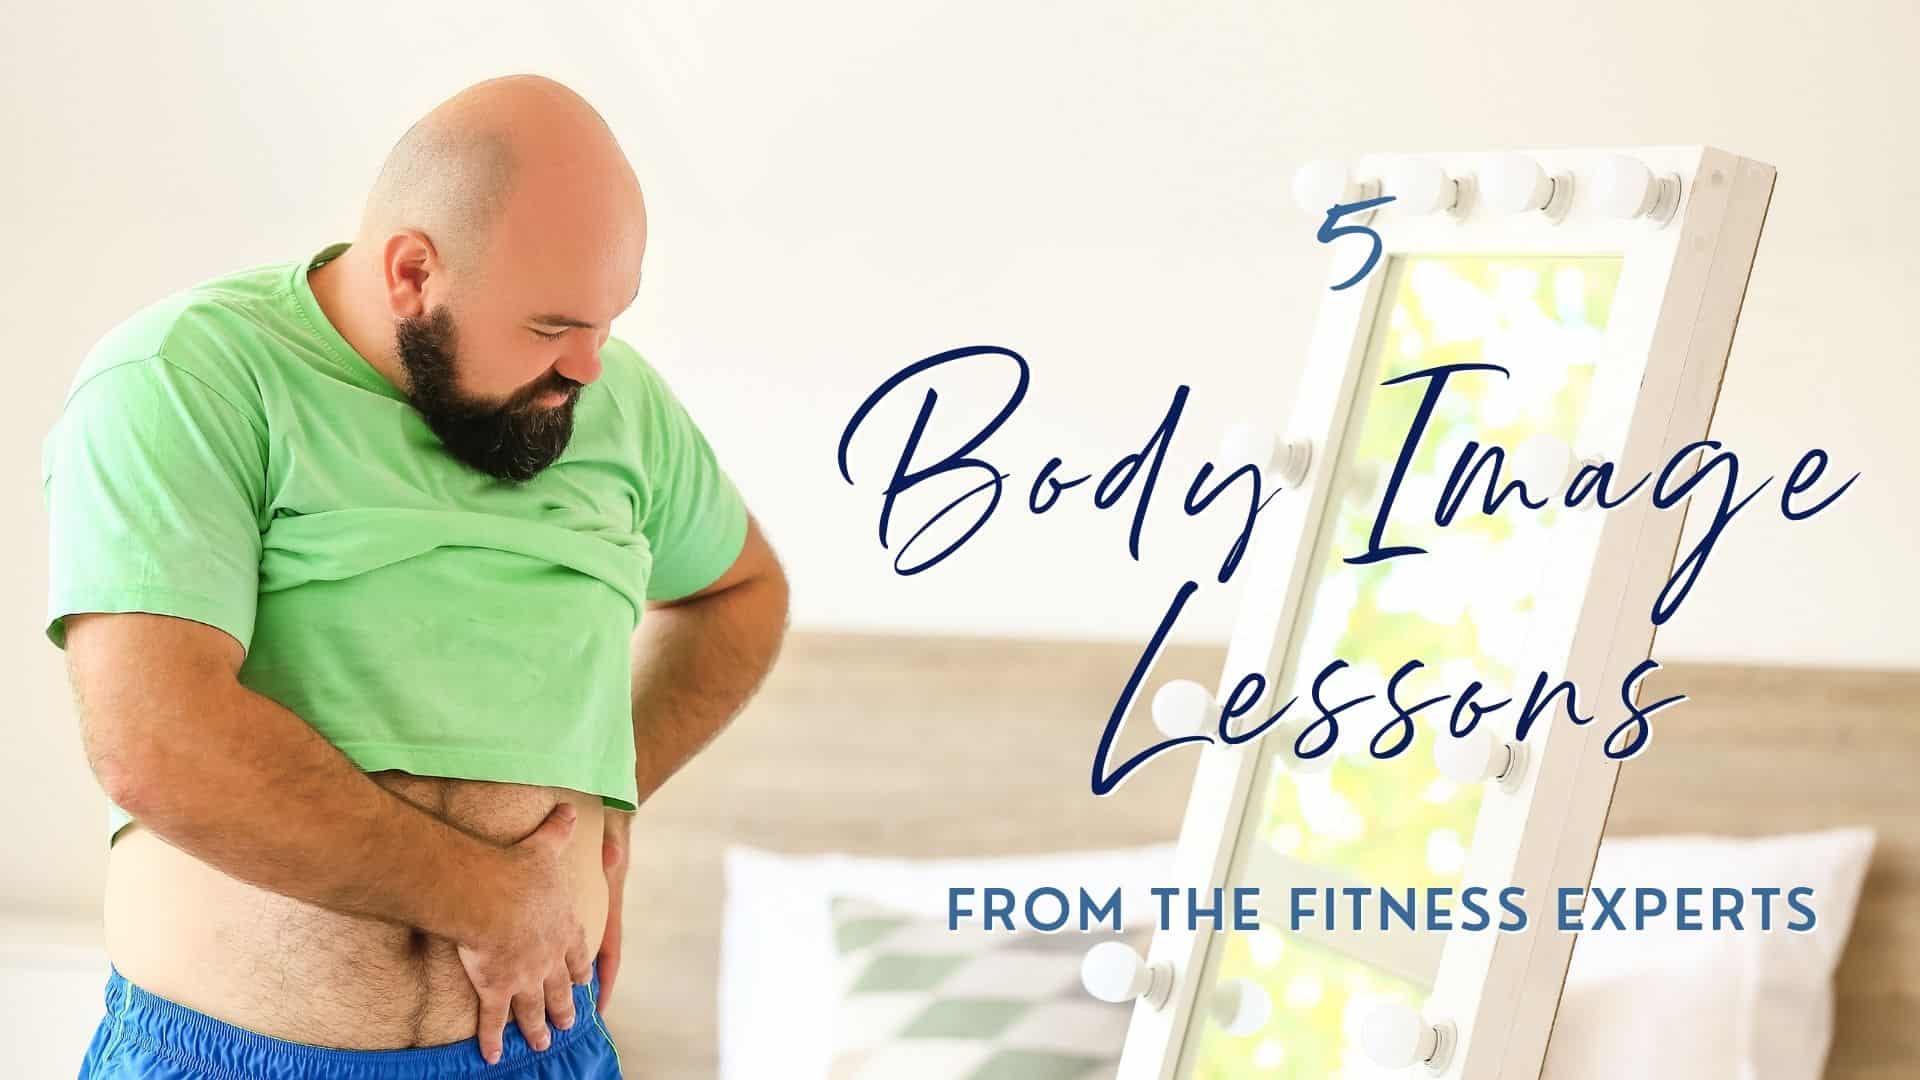 5 Body Image Lessons from Fitness Experts